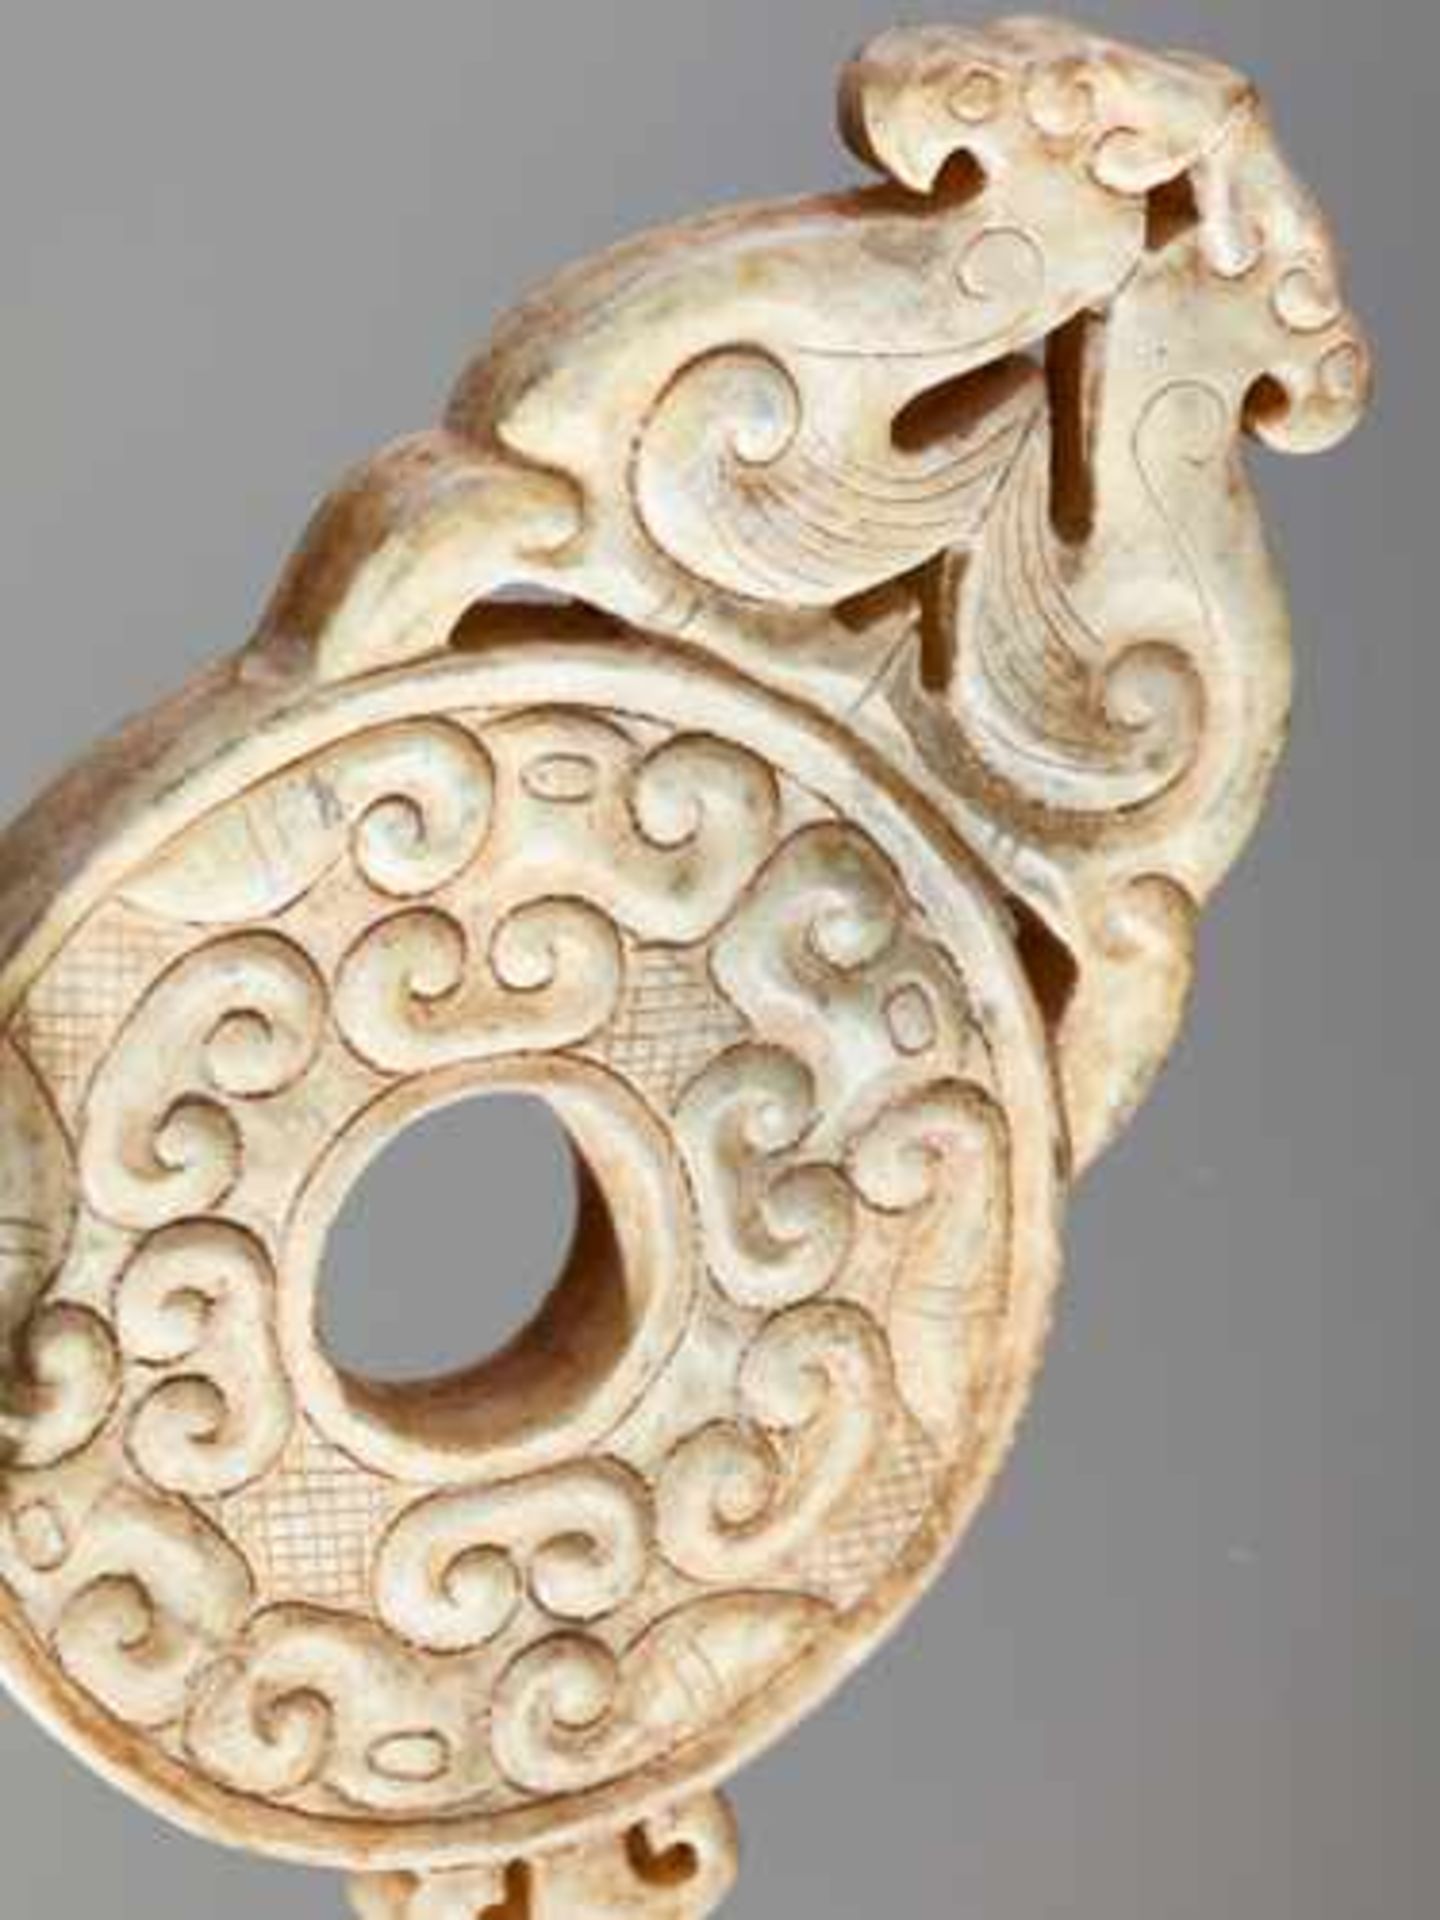 AN ATTRACTIVE SMALL DISC ORNAMENT EMBELLISHED WITH OPENWORK PHOENIXES ON TOP Jade, China. Eastern - Image 4 of 6